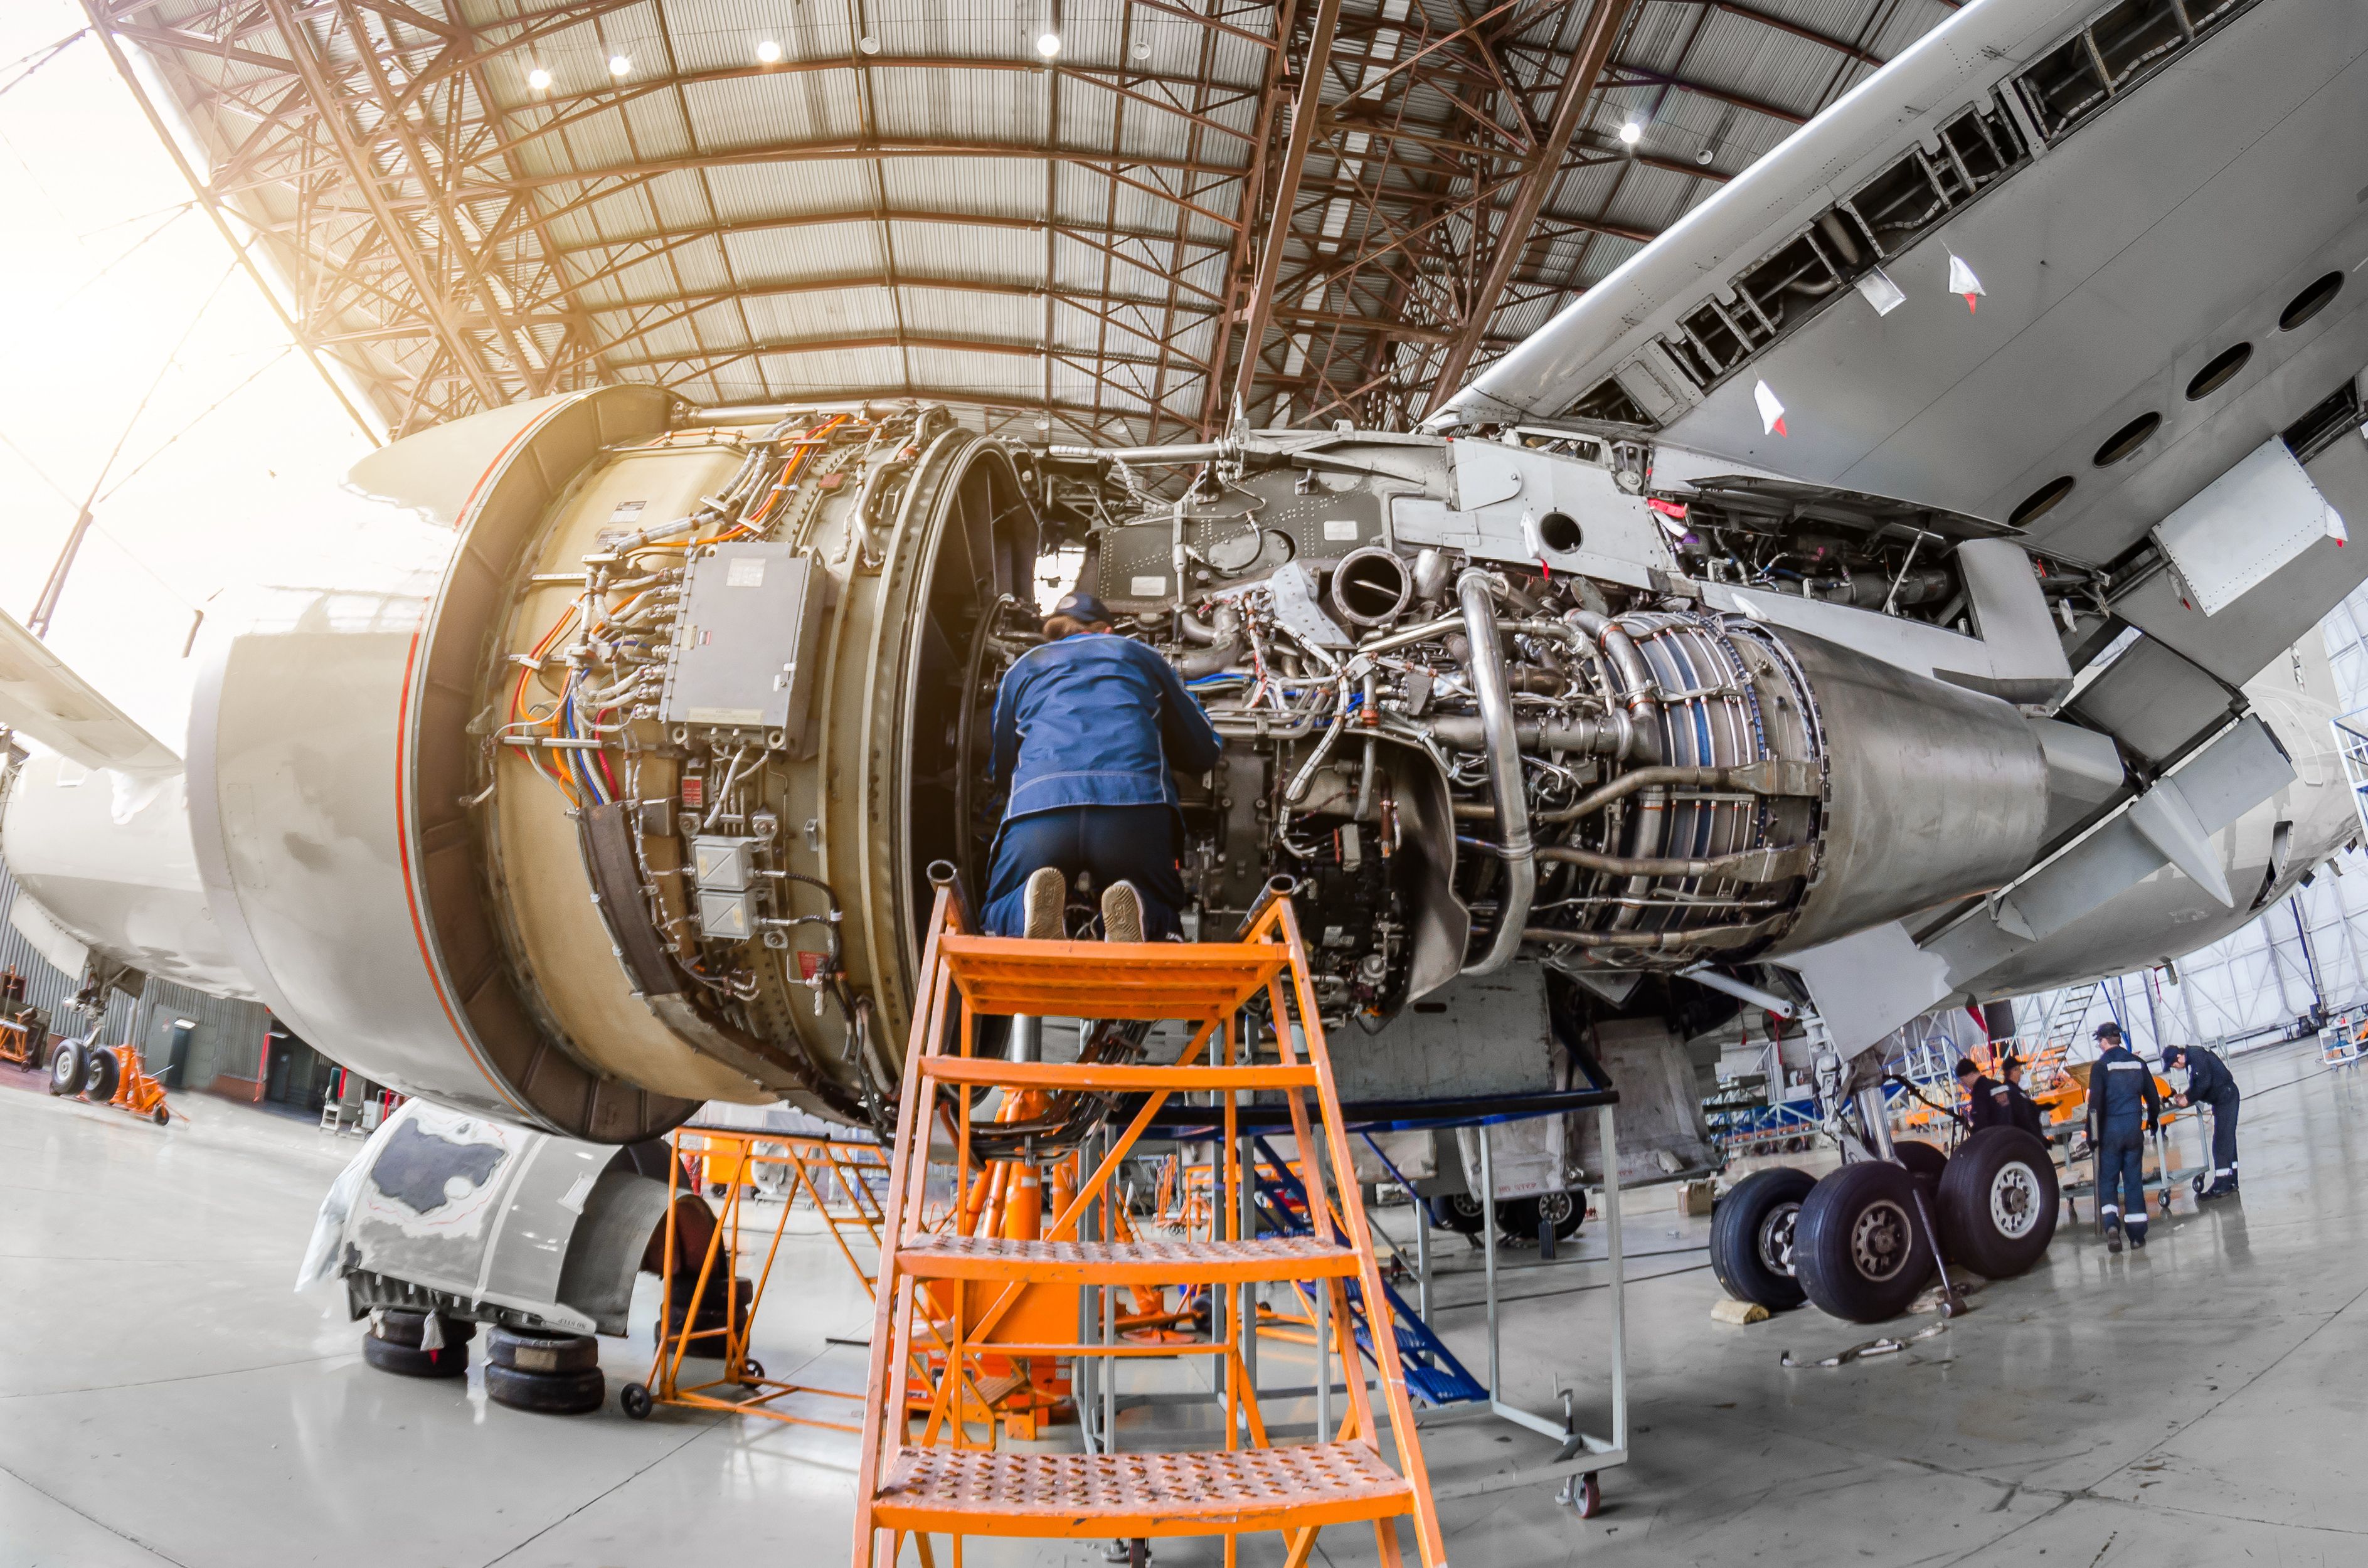 shutterstock_727853458 - Specialist mechanic repairs the maintenance of a large engine of a passenger aircraft in a hangar